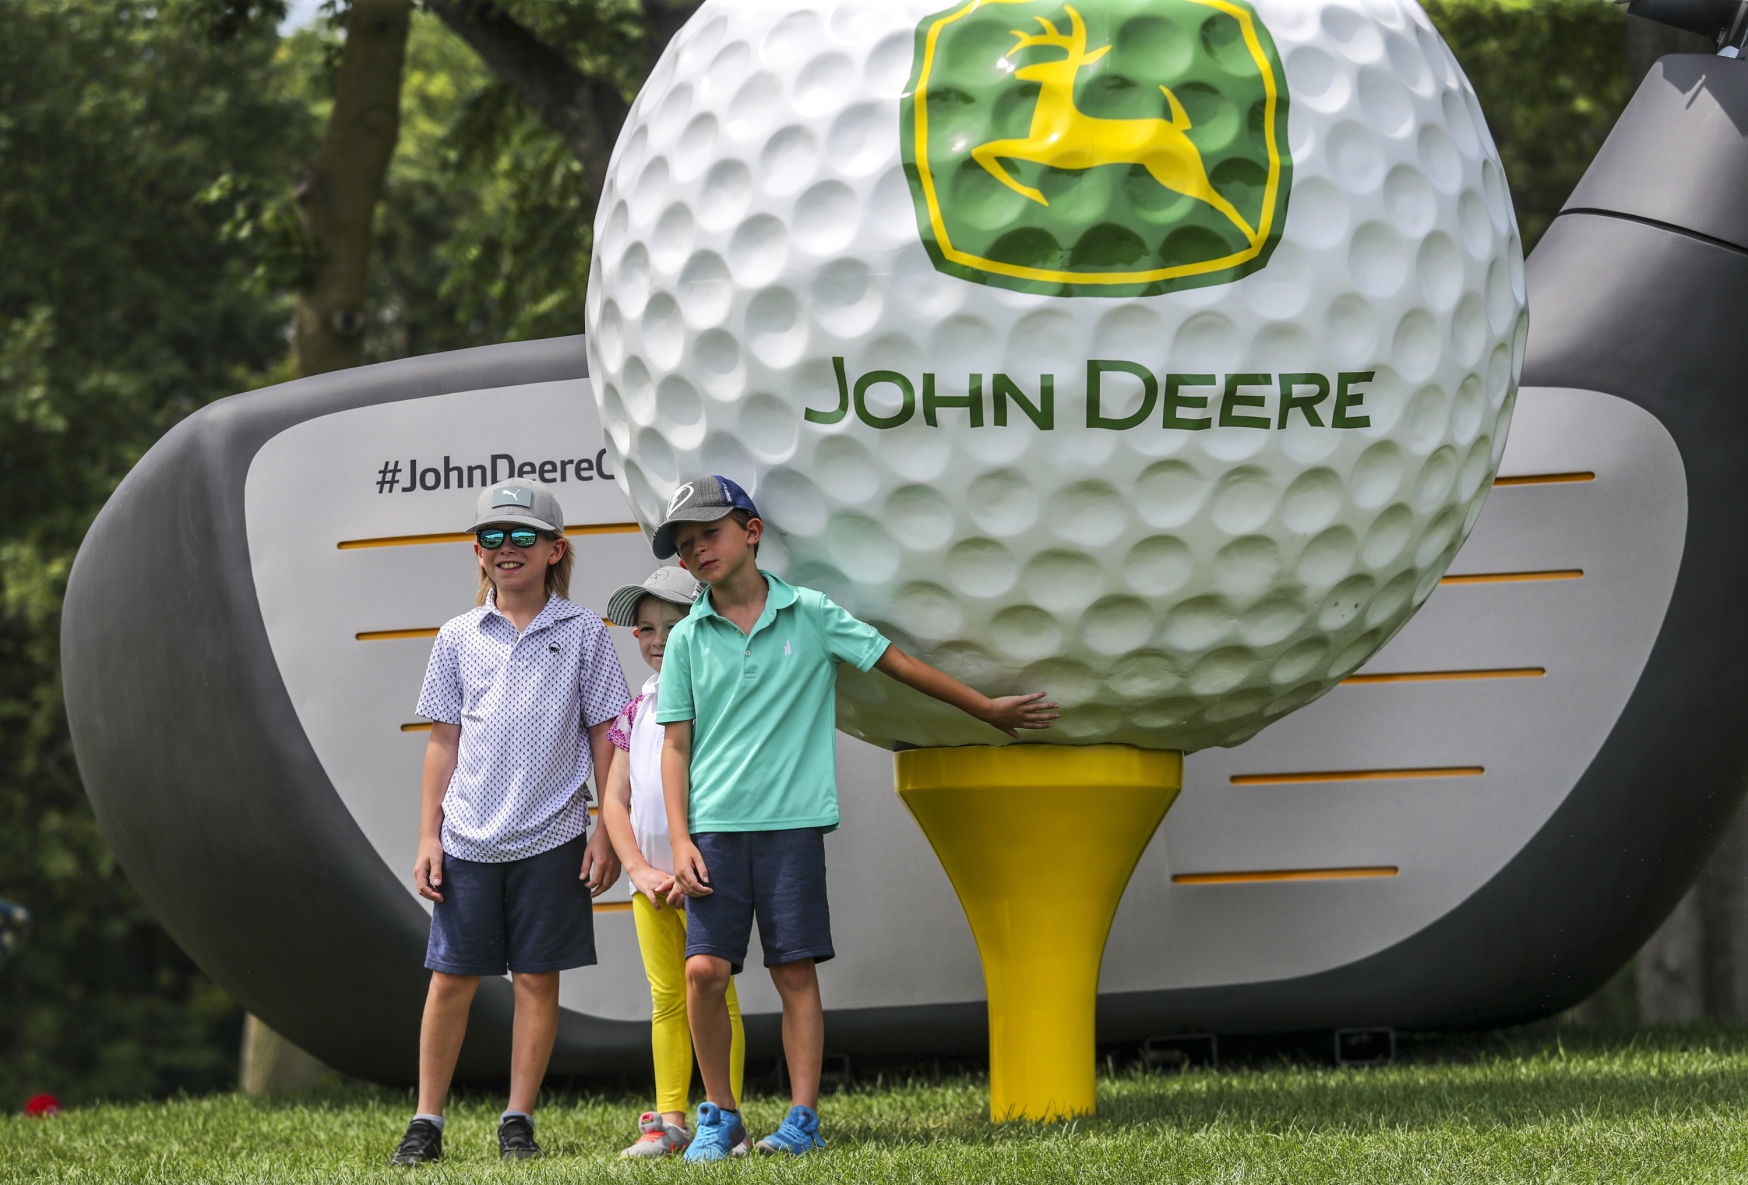 Family Zone at John Deere Classic is an air-conditioned oasis of fun